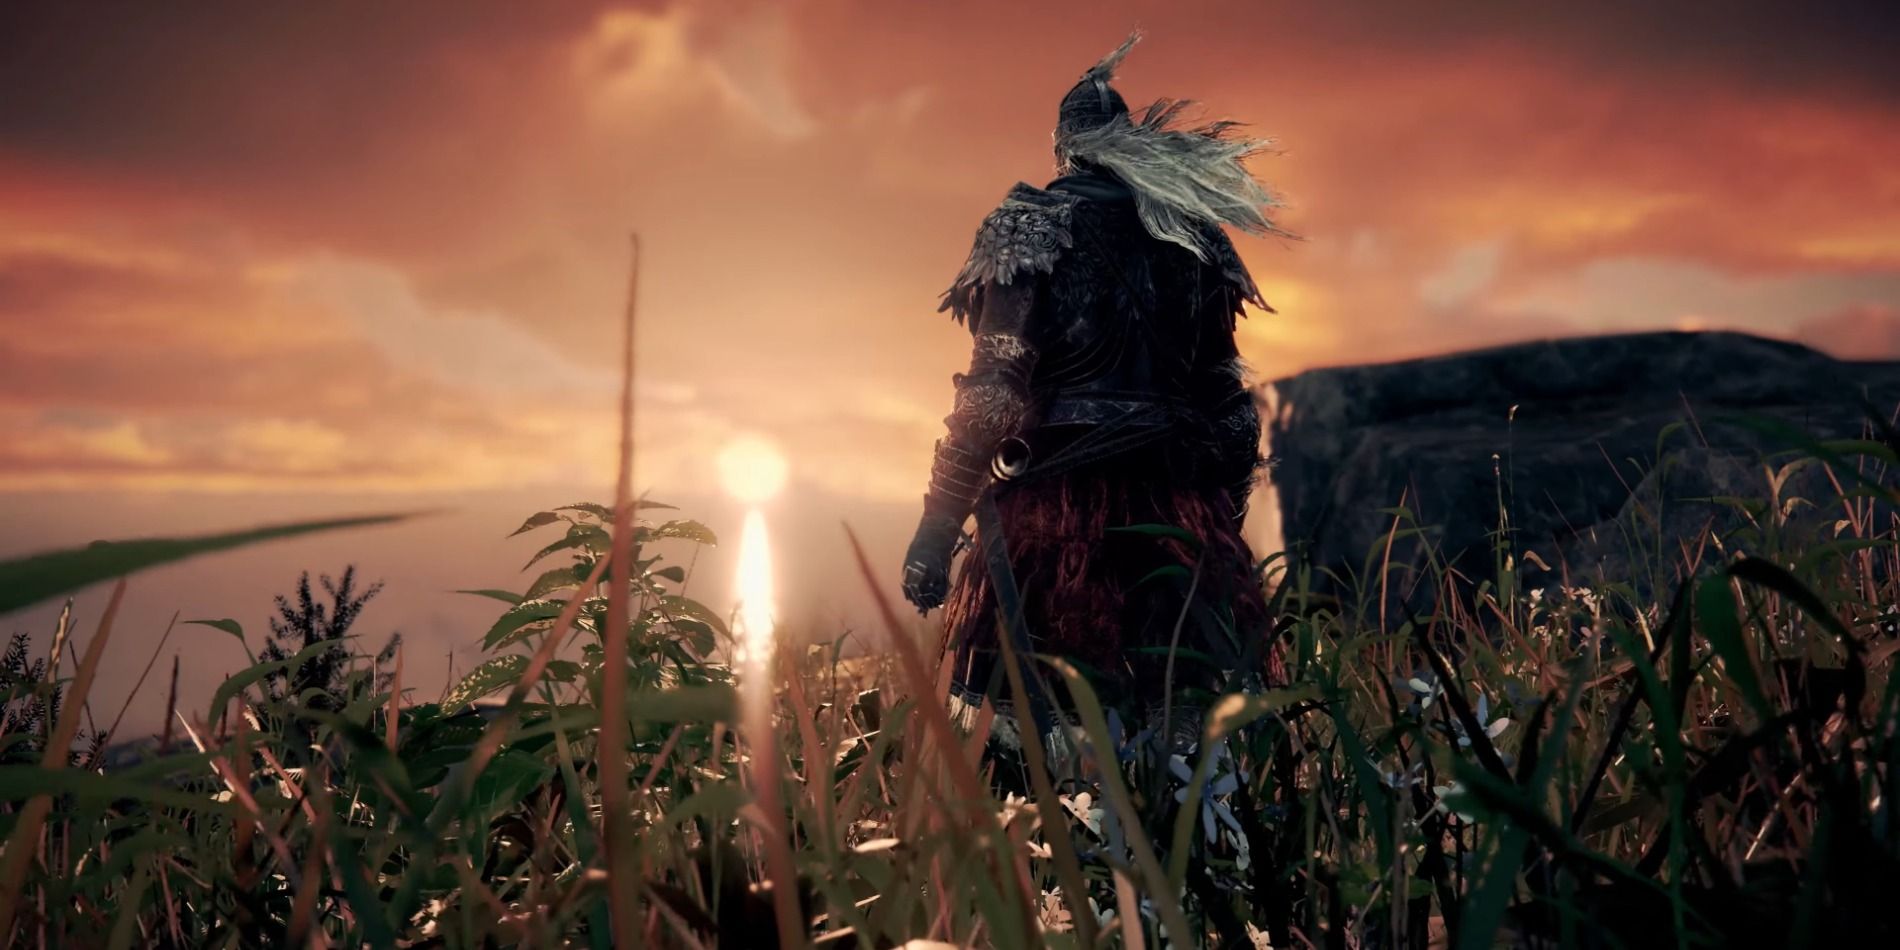 The player character in the Elden Ring gameplay trailer